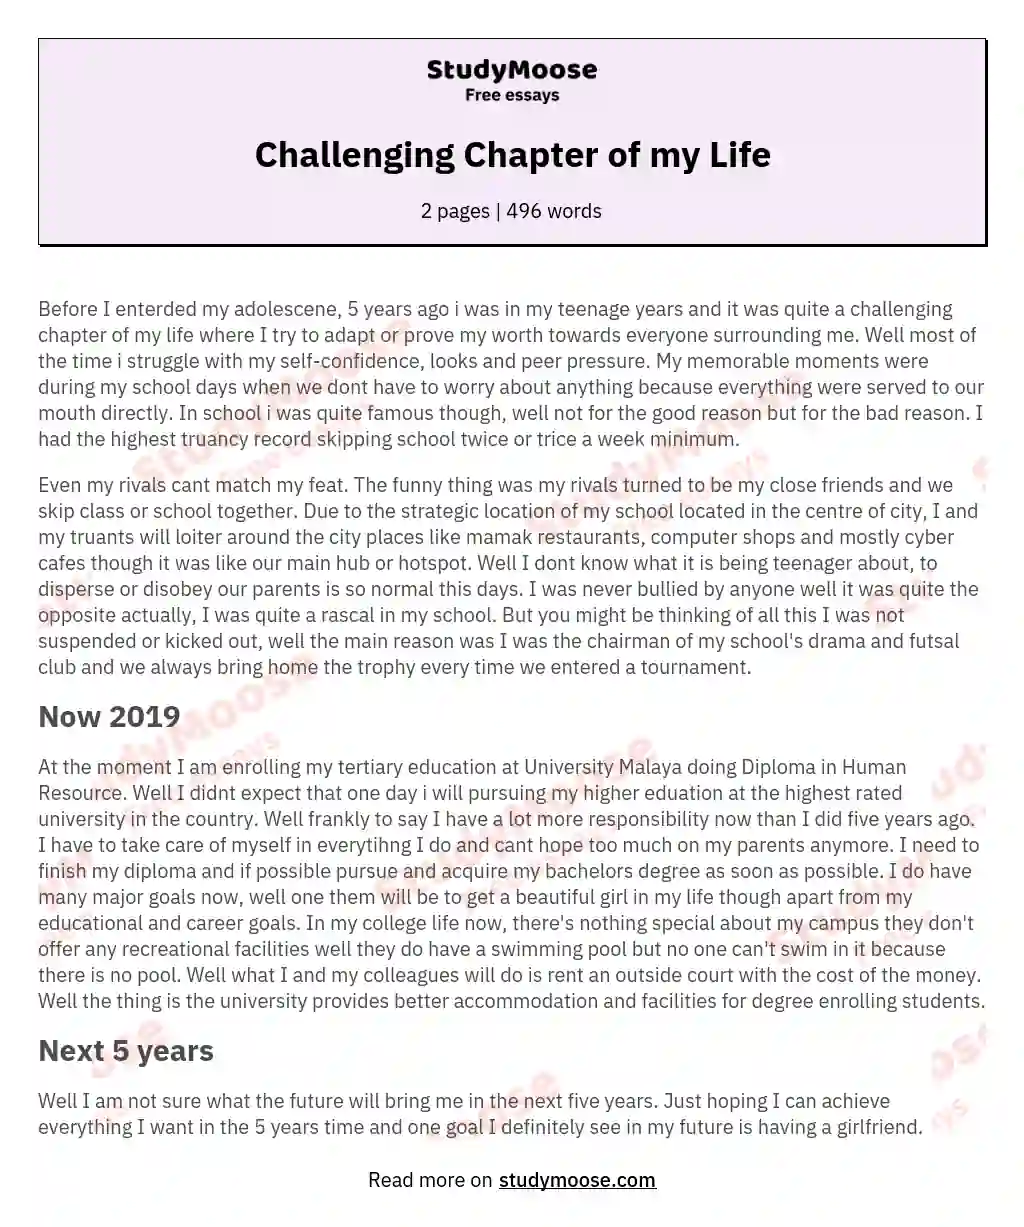 Challenging Chapter of my Life essay